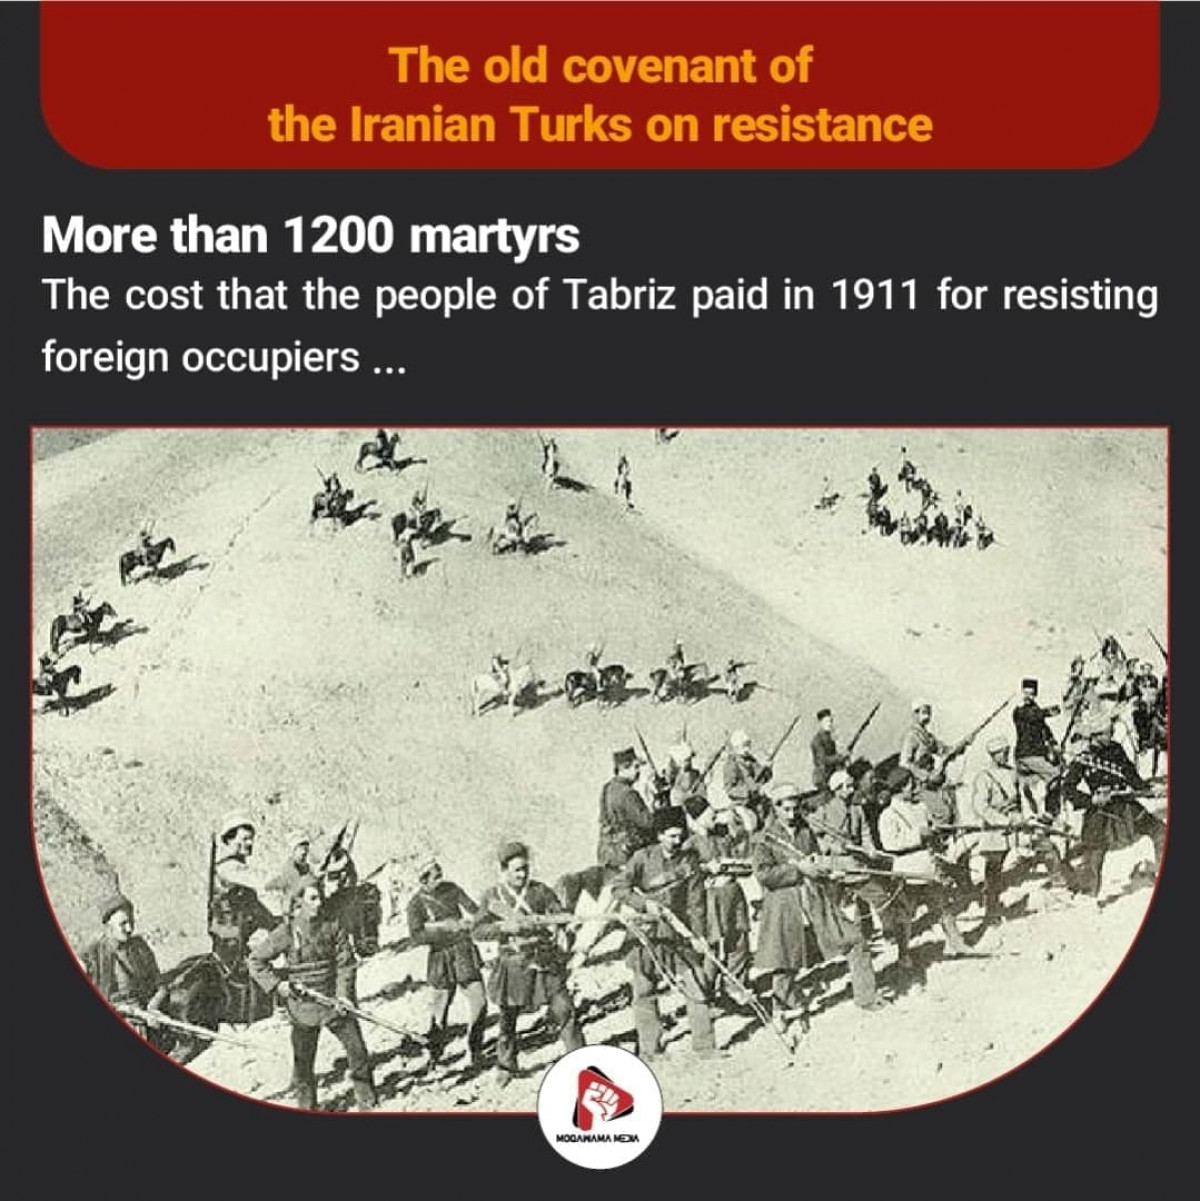 The cost that the people of Tabriz paid in 1911 for resisting foreign occupiers